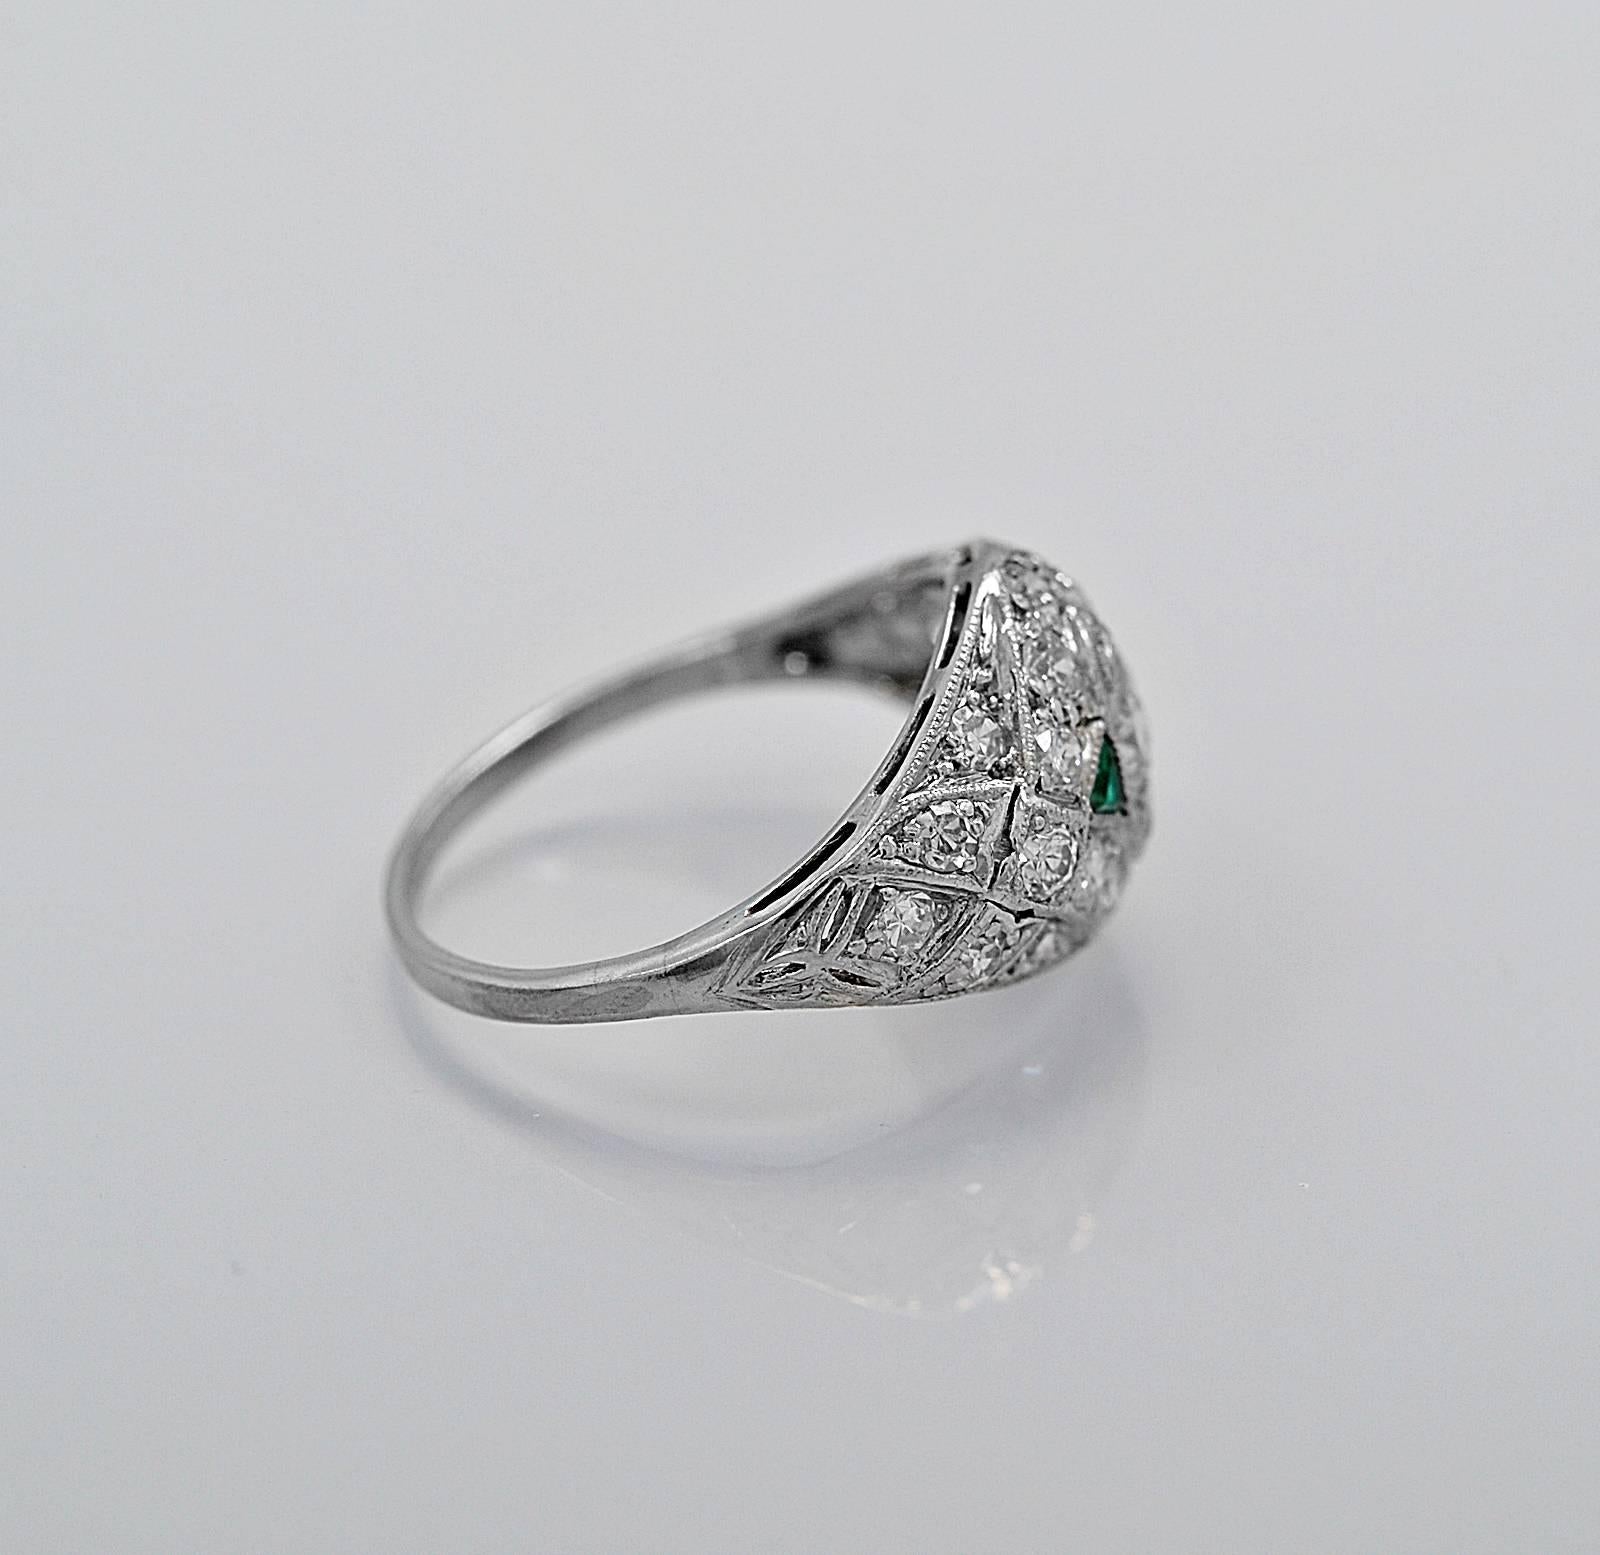 A stunning antique engagement ring or fashion ring featuring a center diamond that is .20ct. apx. with VS2 clarity and H color. The center diamond is accented with two triangular shaped natural emeralds. To balance off this fabulous one of a kind